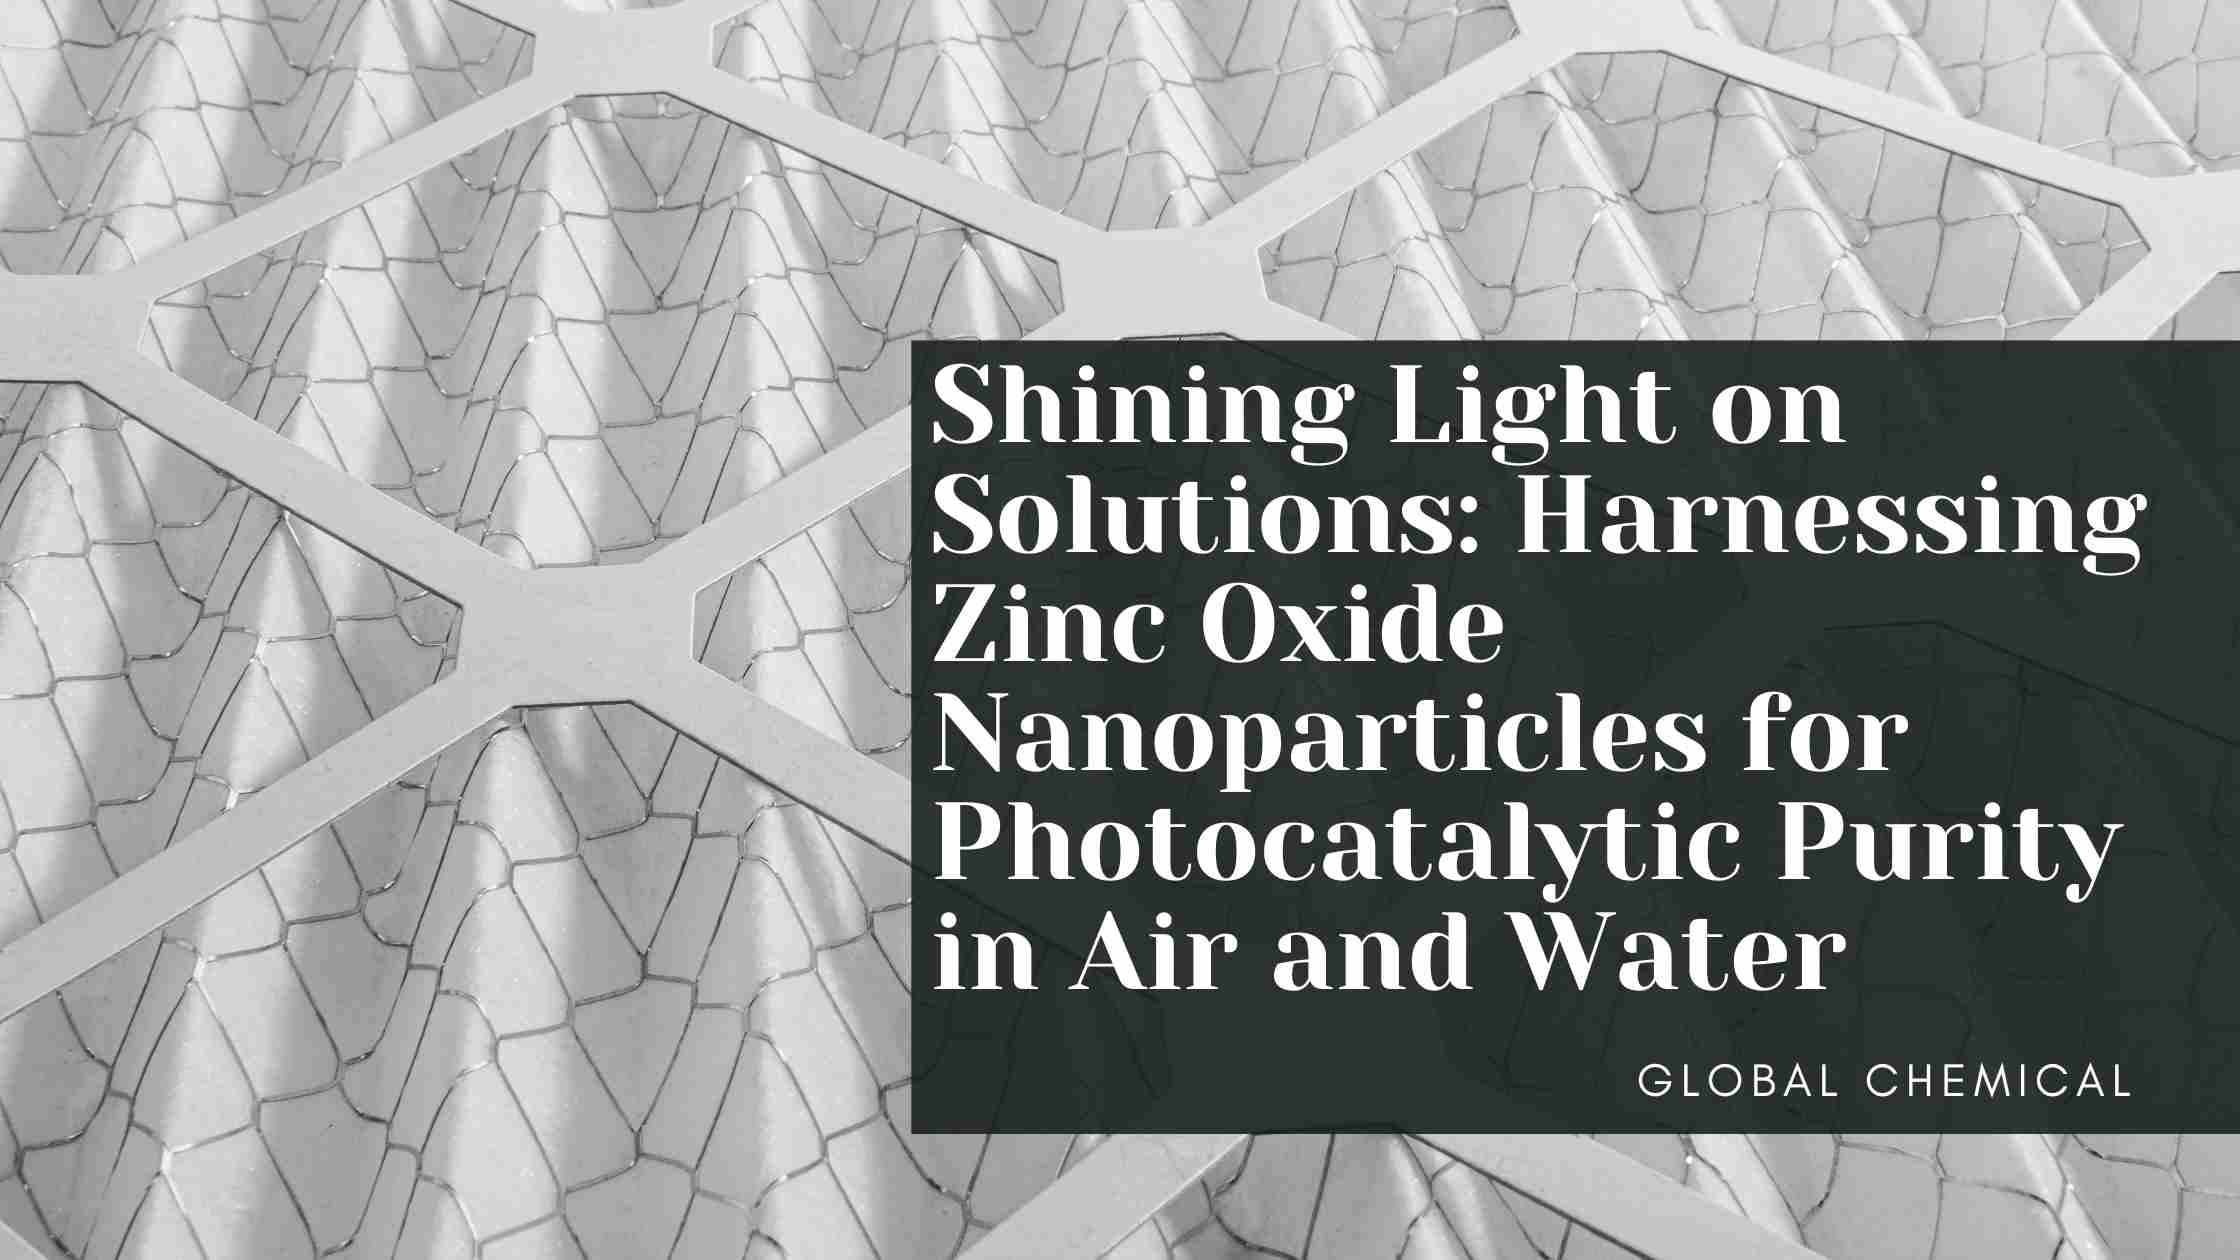 Shining Light on Solutions: Harnessing Zinc Oxide Nanoparticles for Photocatalytic Purity in Air and Water